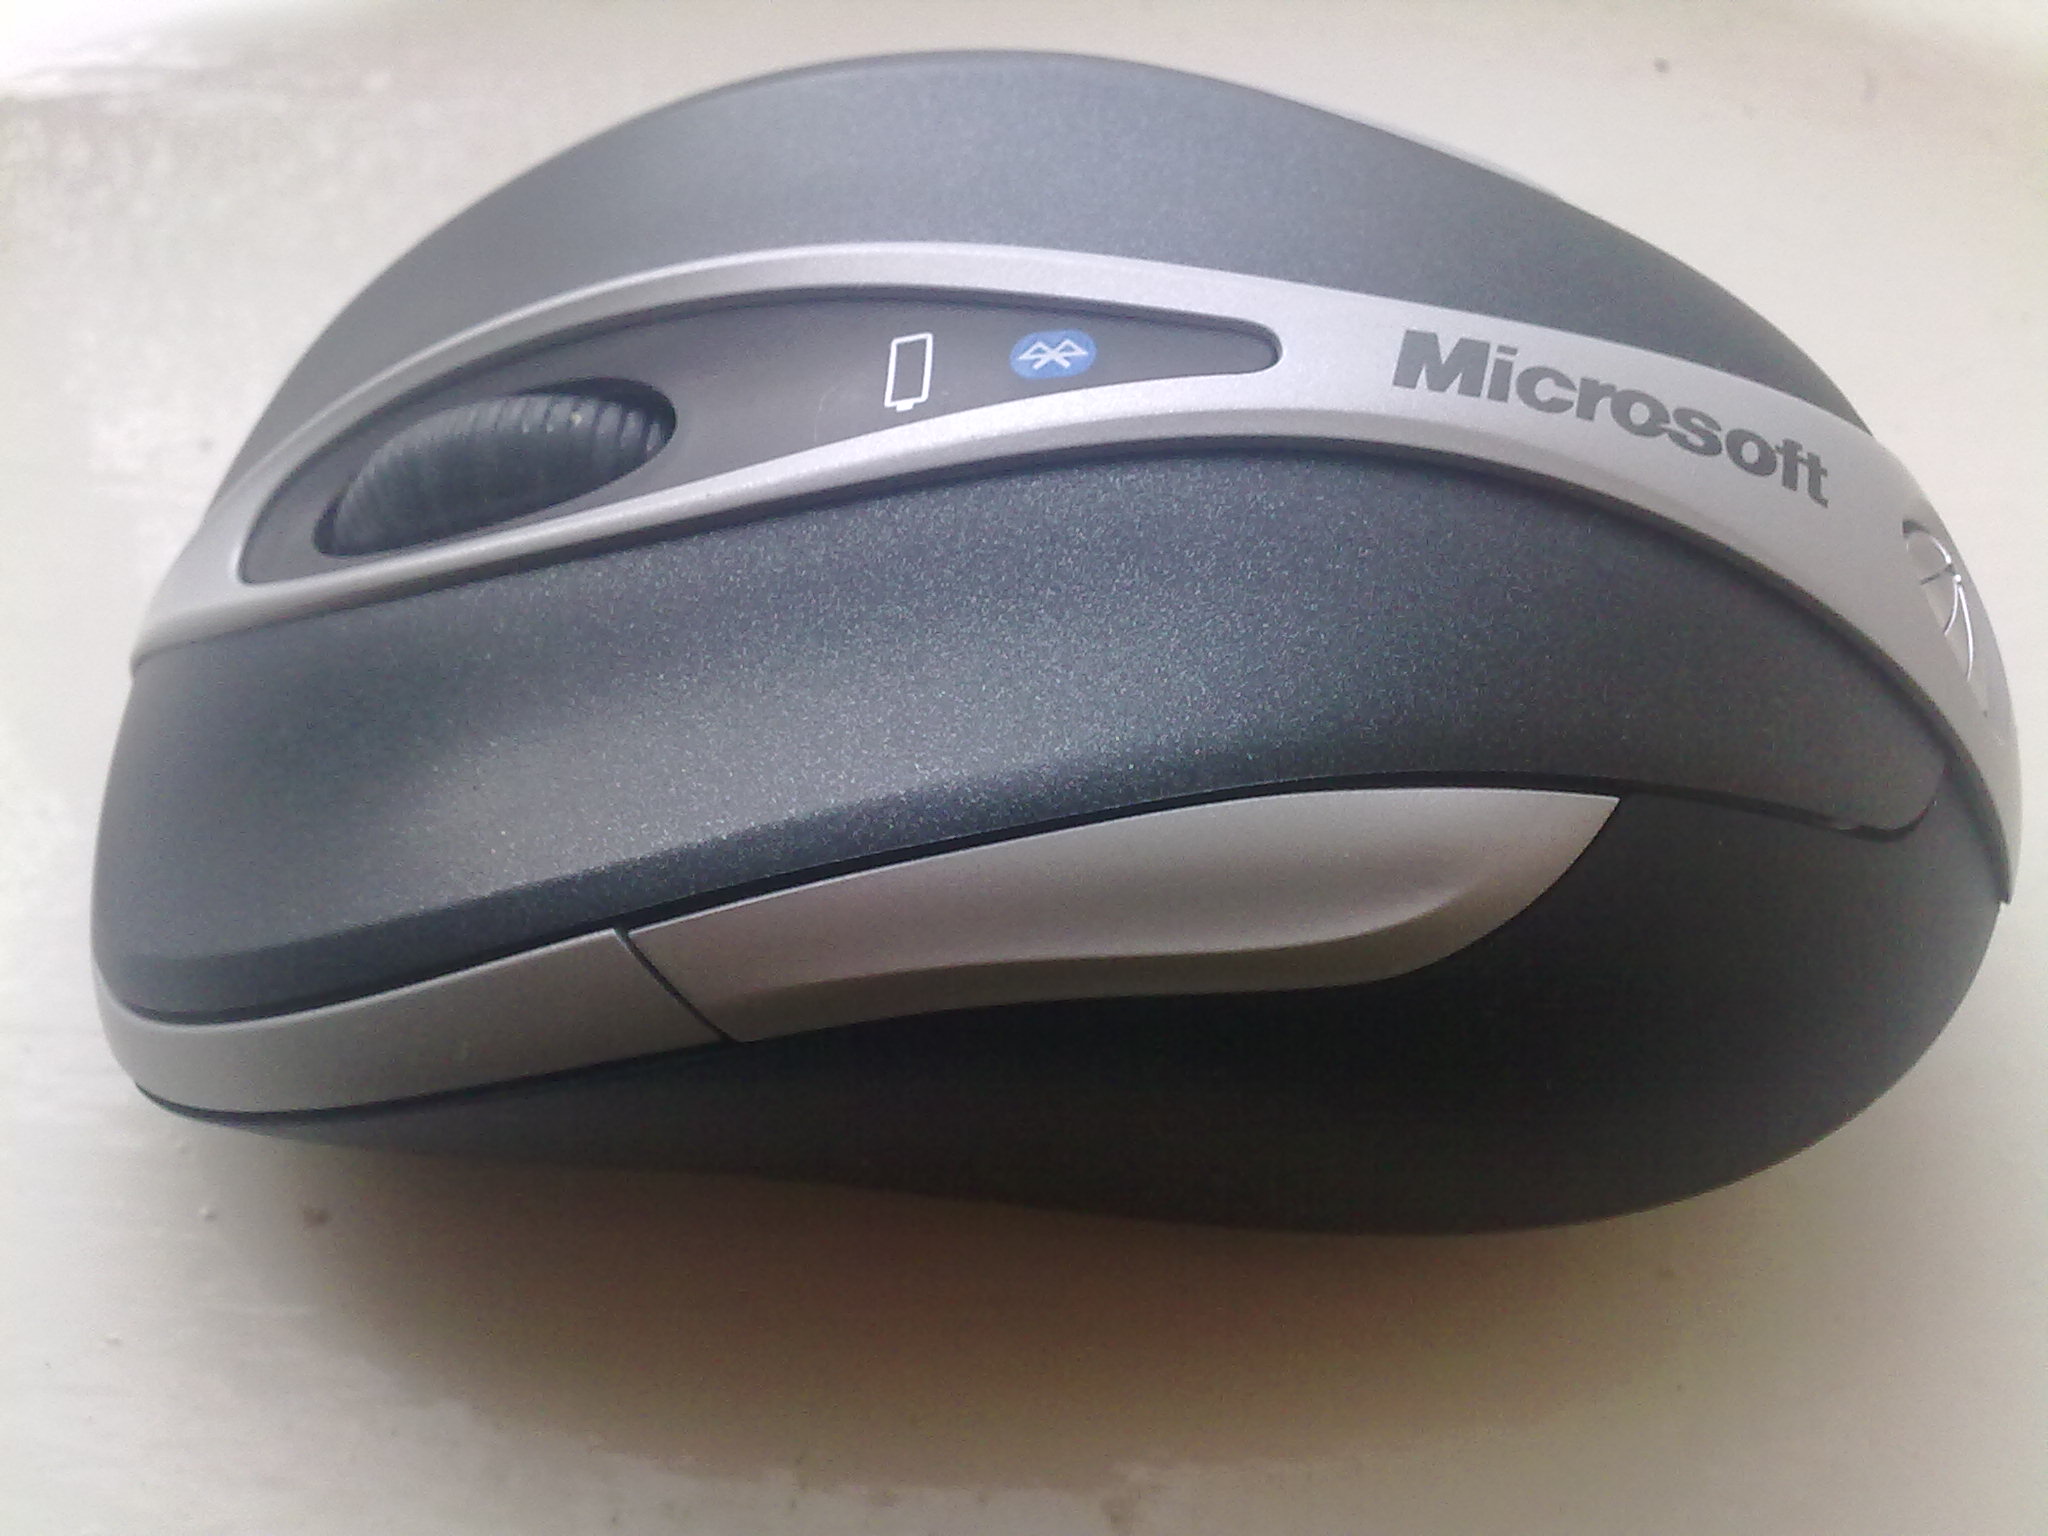 Microsoft Notebook Mouse 5000 Driver Windows 7